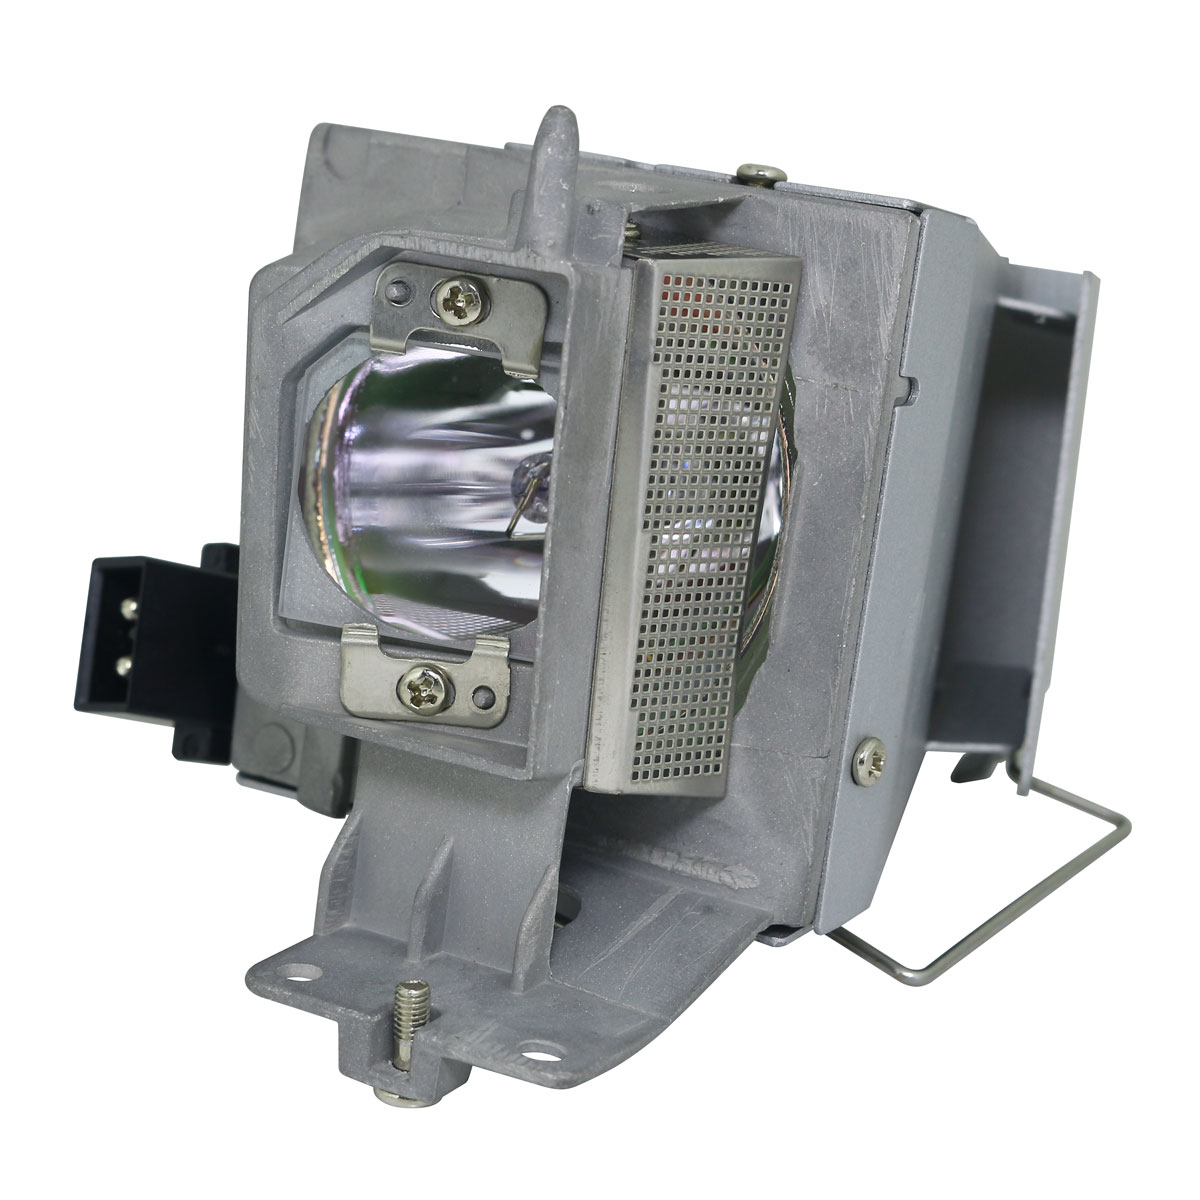 Original Osram Projector Lamp Replacement with Housing for InFocus SP-LAMP-100 - image 1 of 6